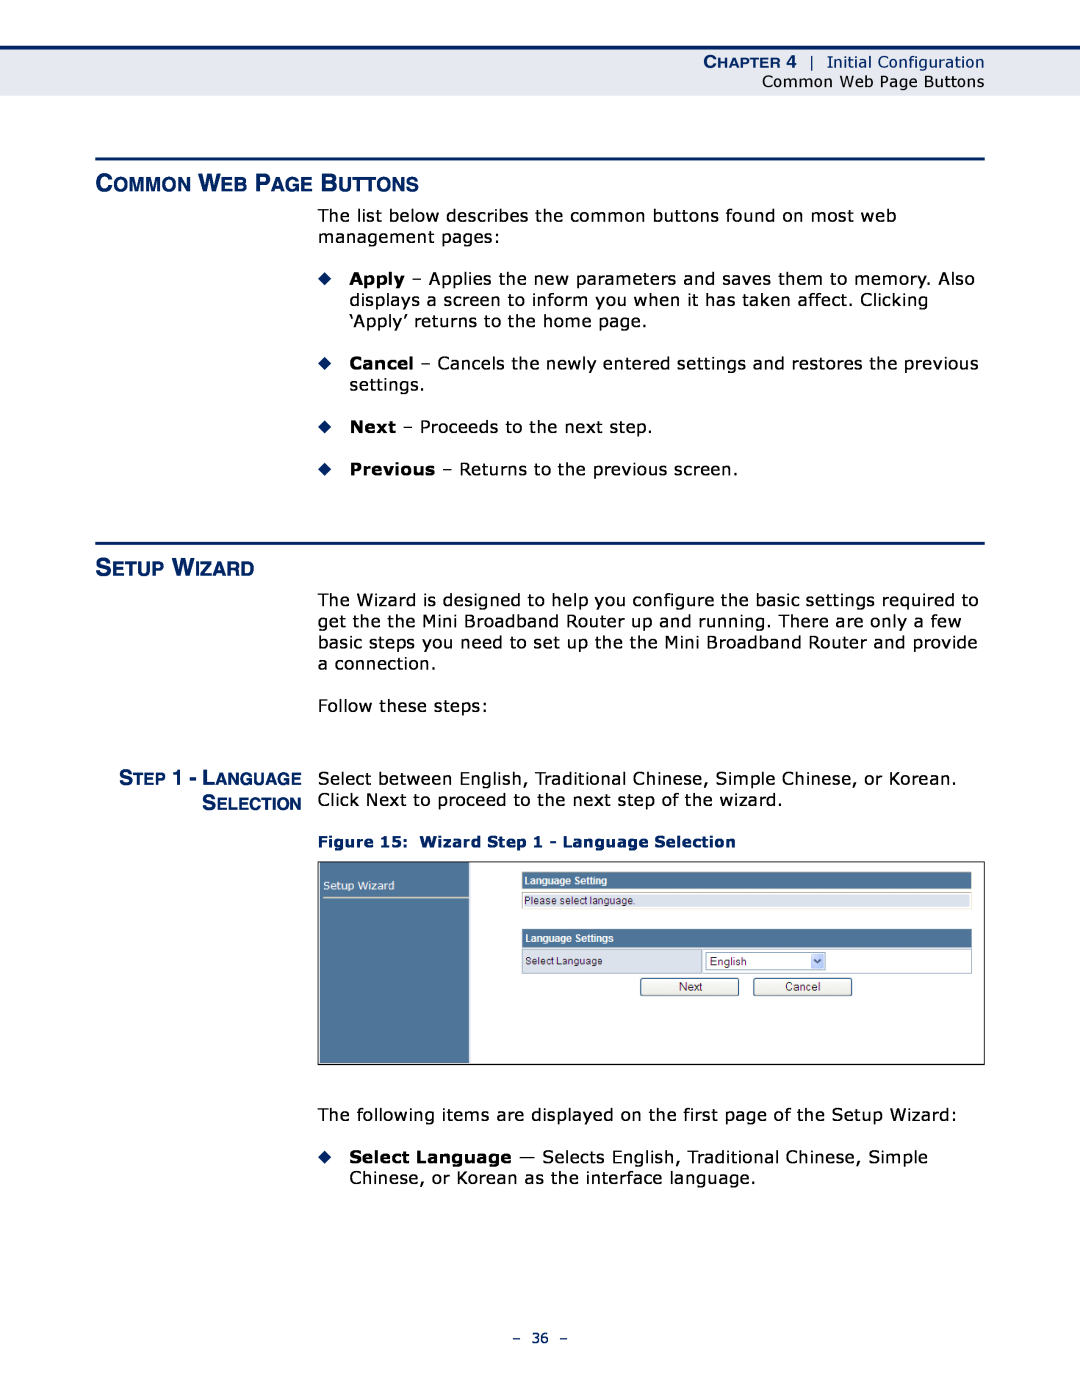 SMC Networks SMCWBR11S-N manual Common Web Page Buttons, Setup Wizard 